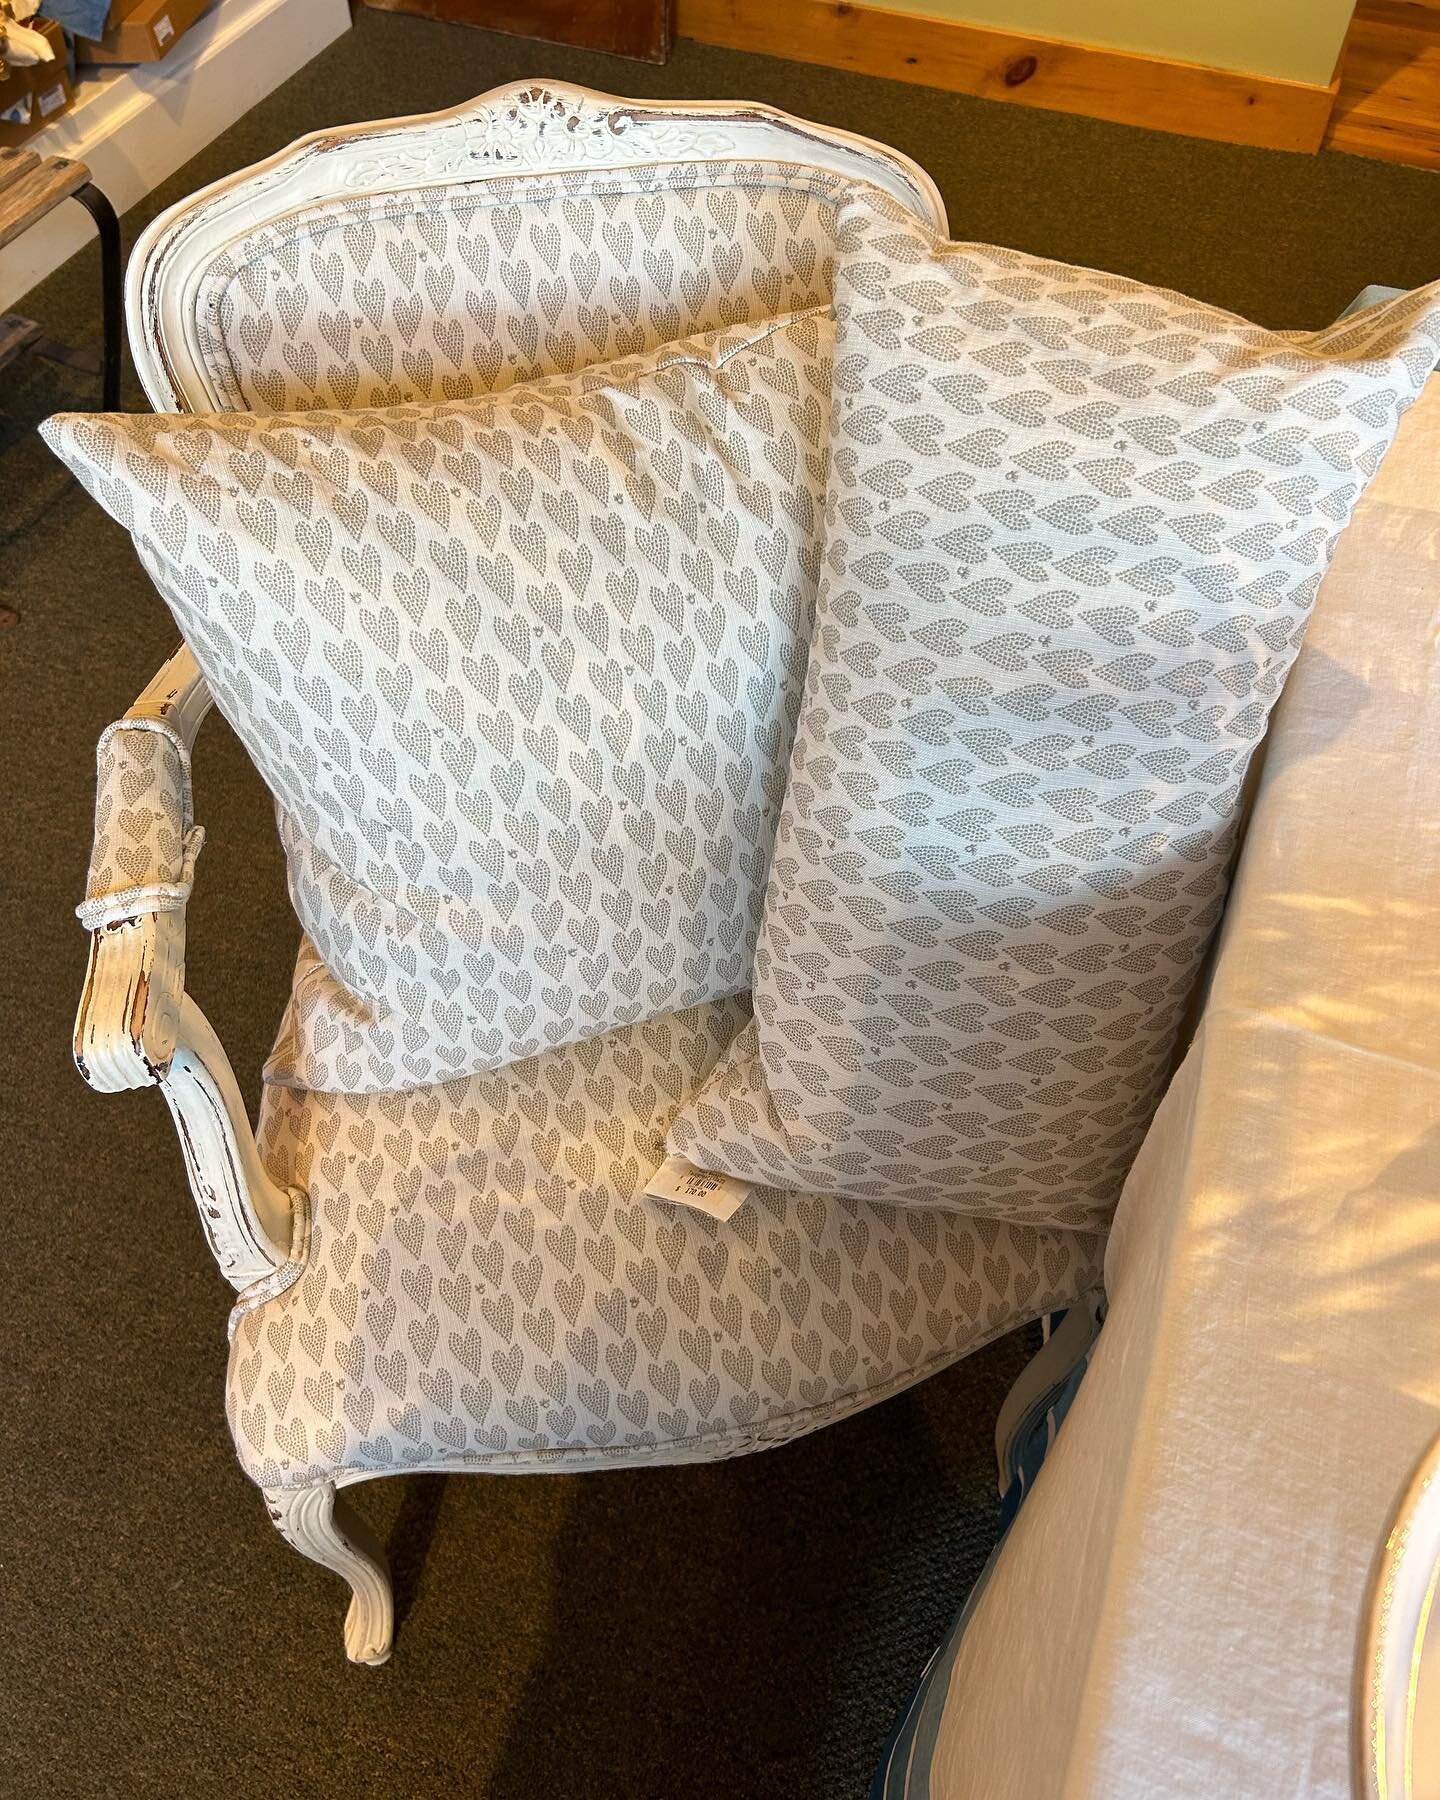 Save your seat!! 20% off 4/6-4/20 on Betsy Gallagher in store originals. Her pillows and reupholstered vintage pieces are one-of-a-kind! @gallagher0814 

#pastbasketmilwaukee #springrefresh 
#artistian 
#homedecor 
#artisanmade 
#shopsmall 
#mke #spr